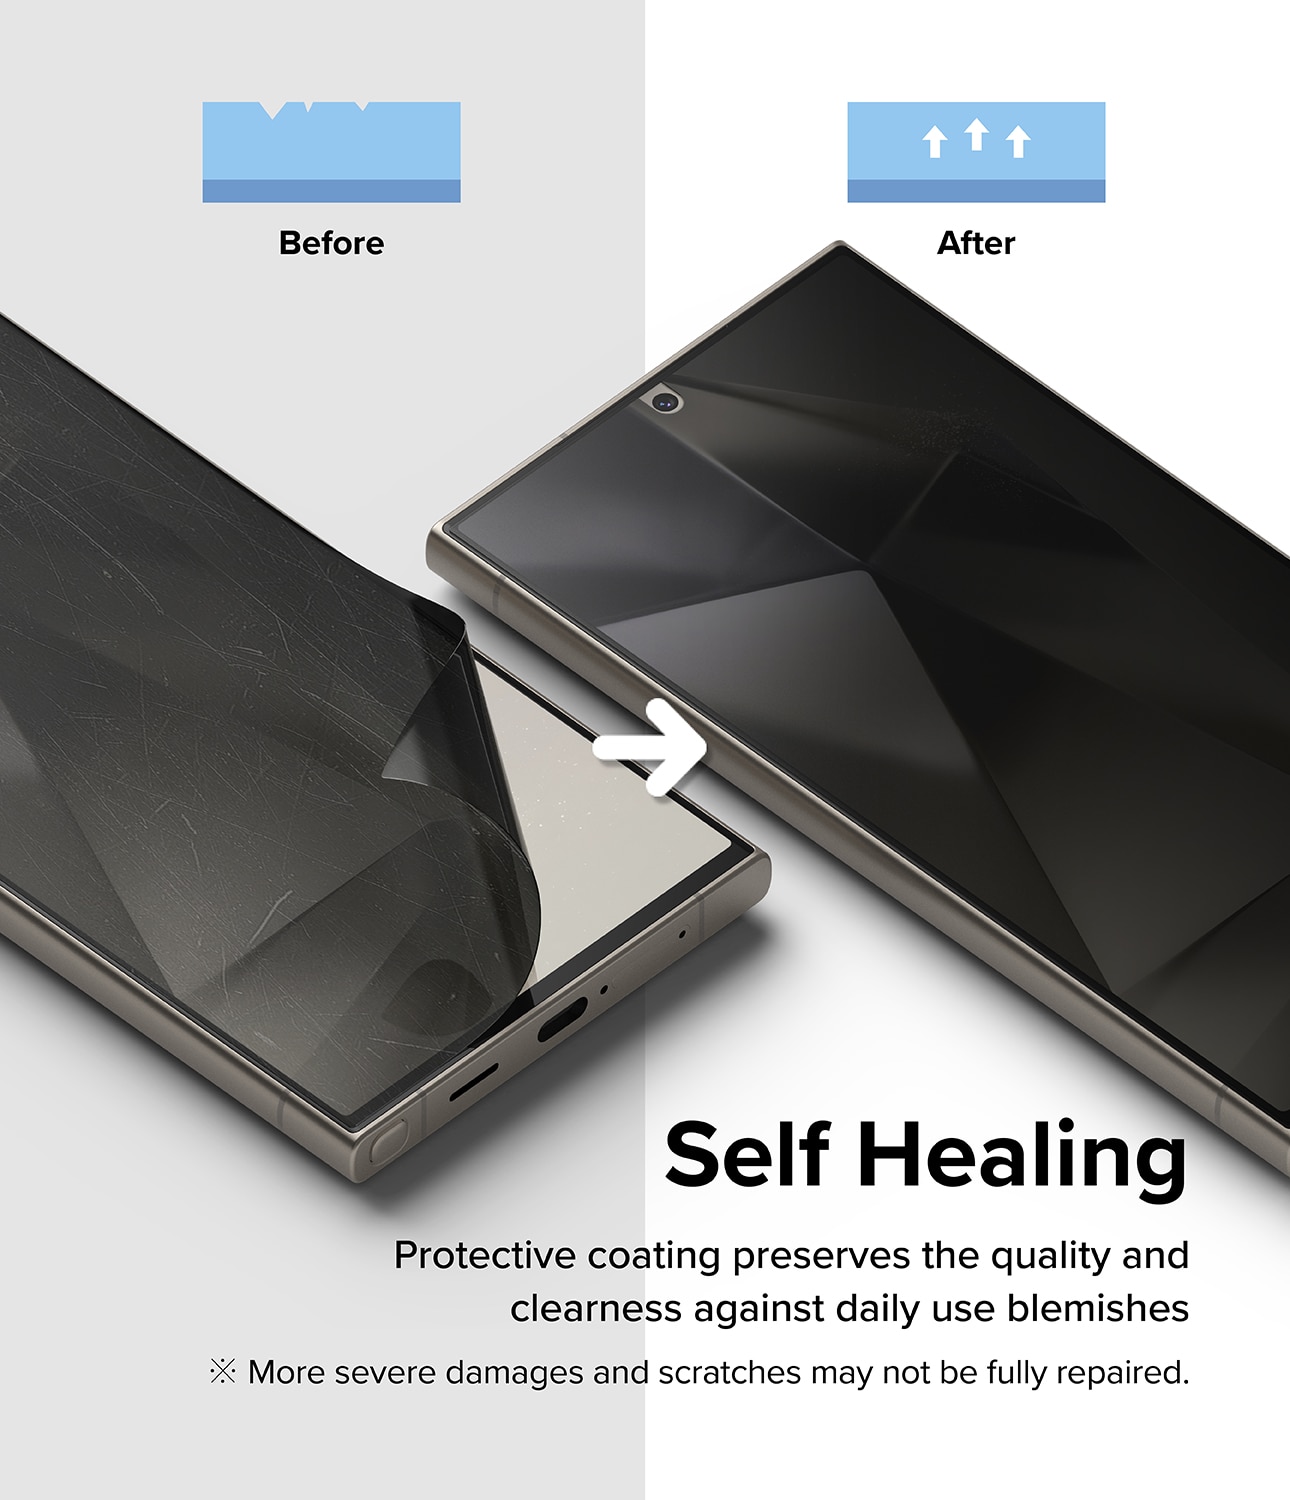 Privacy Dual Easy Screen Protector  Samsung Galaxy S24 Ultra